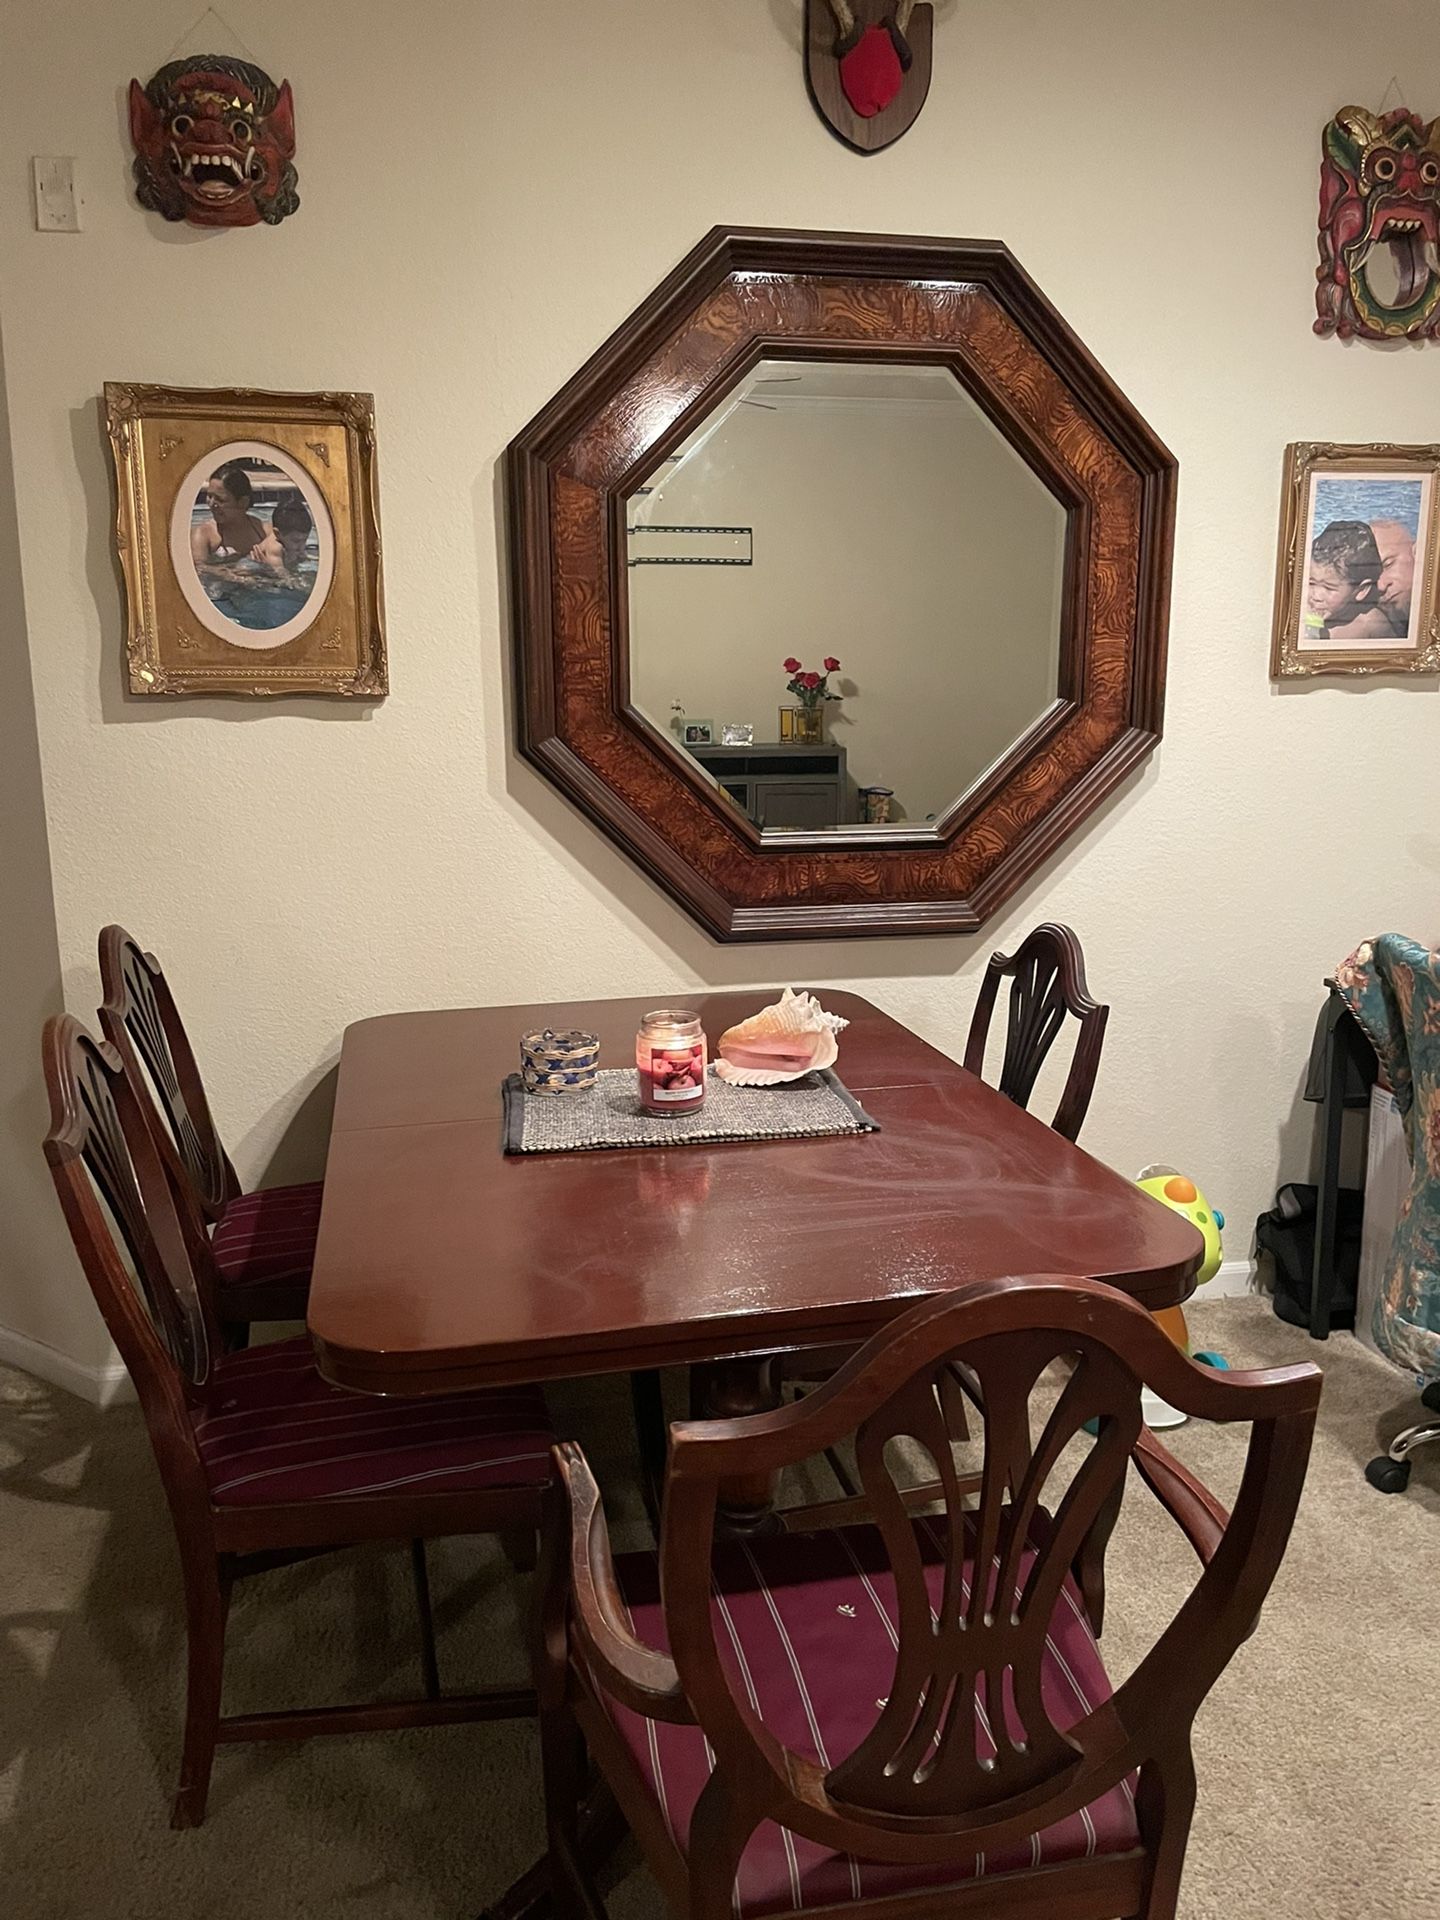 Antique Tables And Mirror 